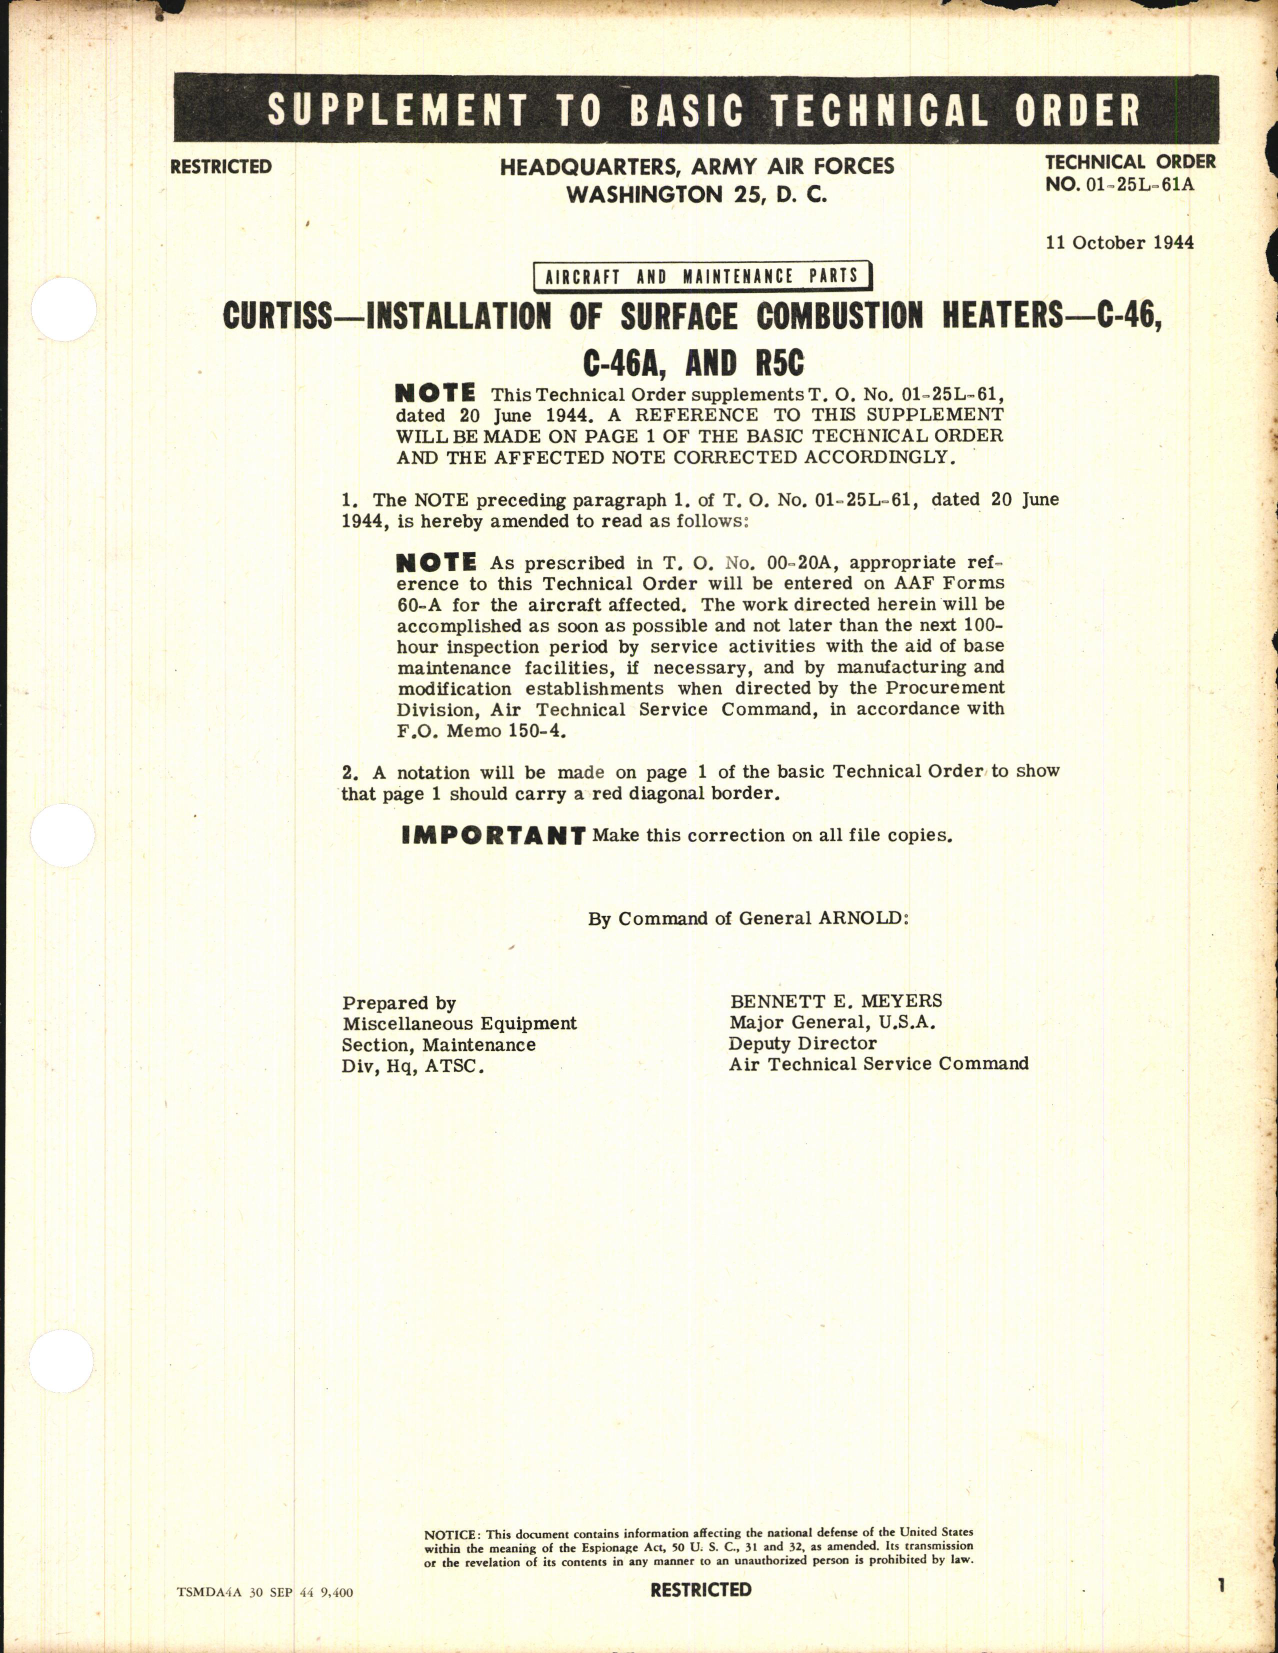 Sample page 1 from AirCorps Library document: Installation of Surface Combustion Heaters for C-46, C-46A, and R5C